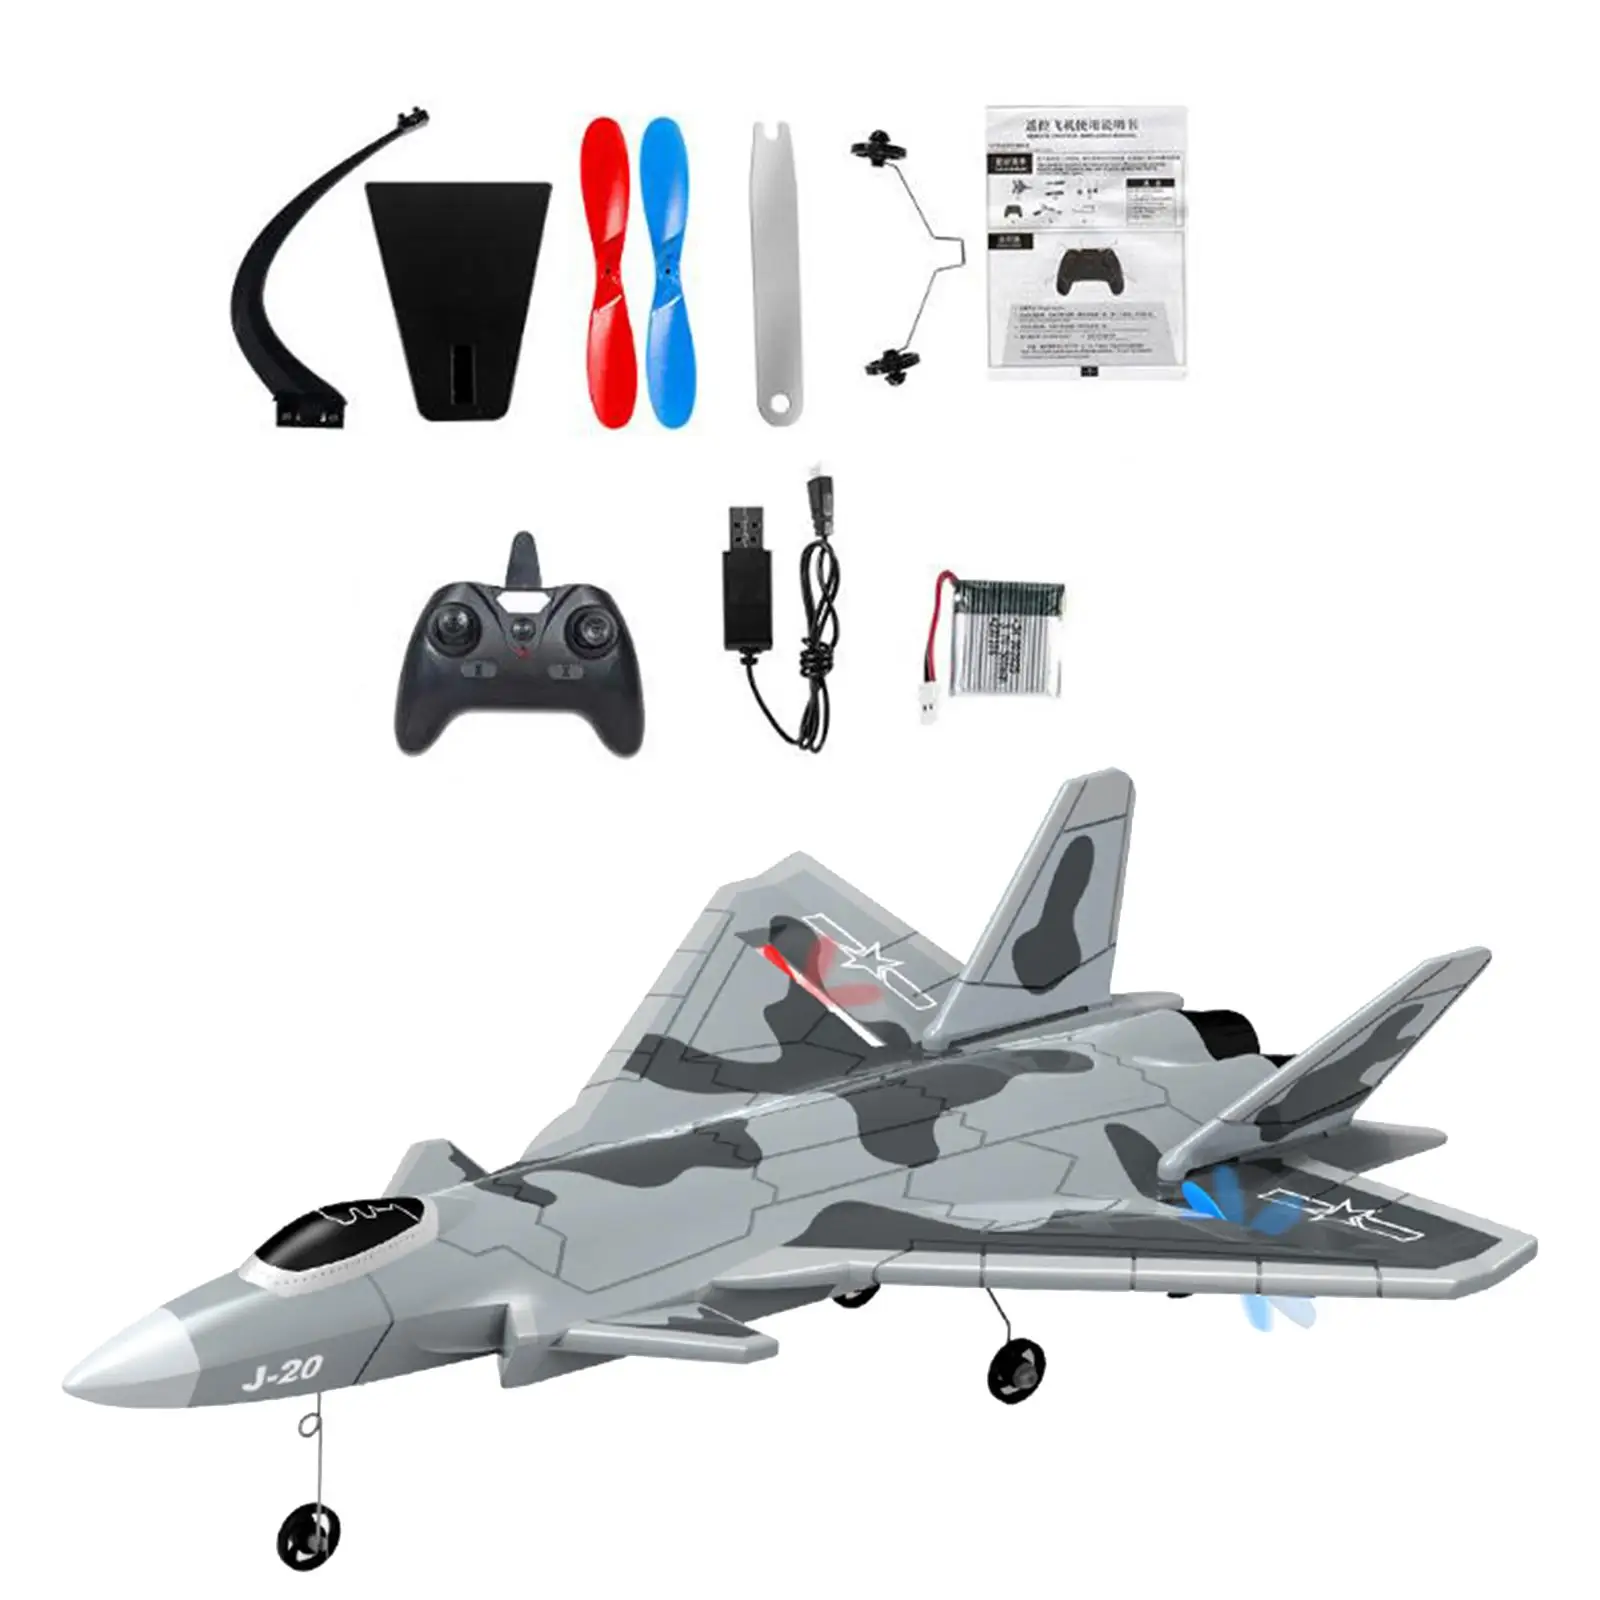 1:72 Scale RC Plane Ground Glide and Manual Take Off 2 Channel Simulation with Display Stand Jet Fighter RC Glider Ready to Fly